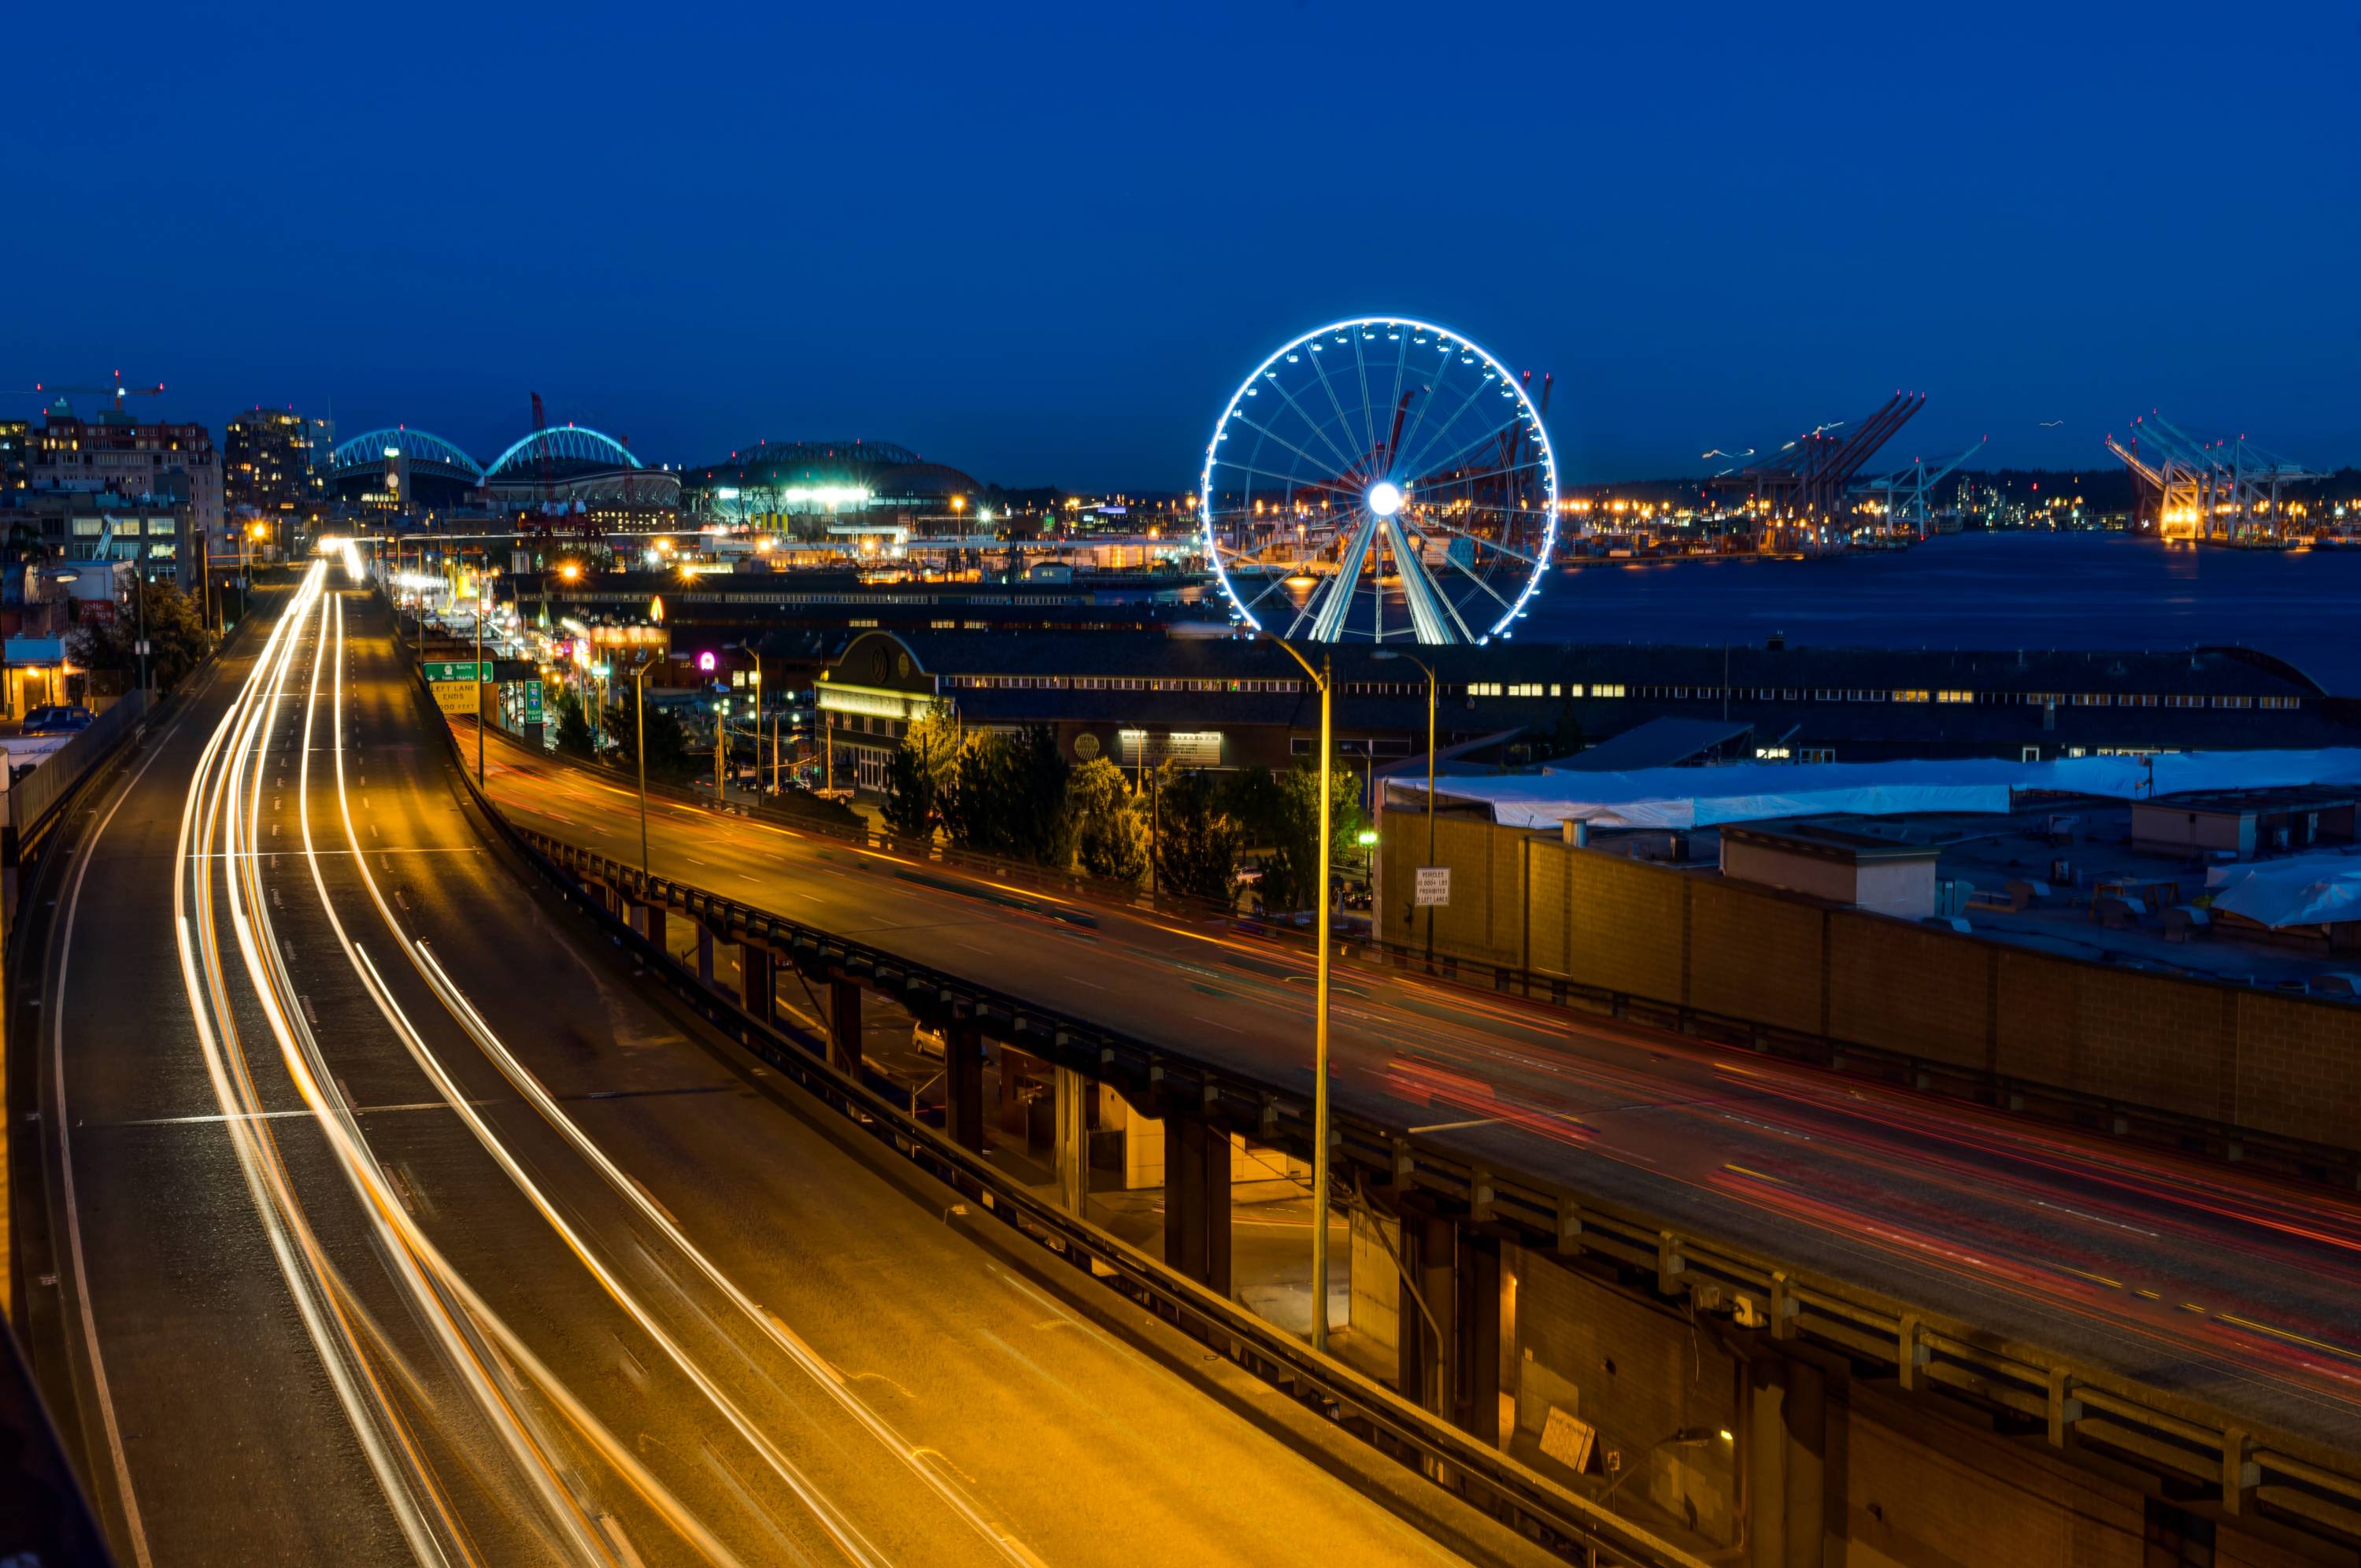 Seattle pier and Ferris wheel and water during nighttime image